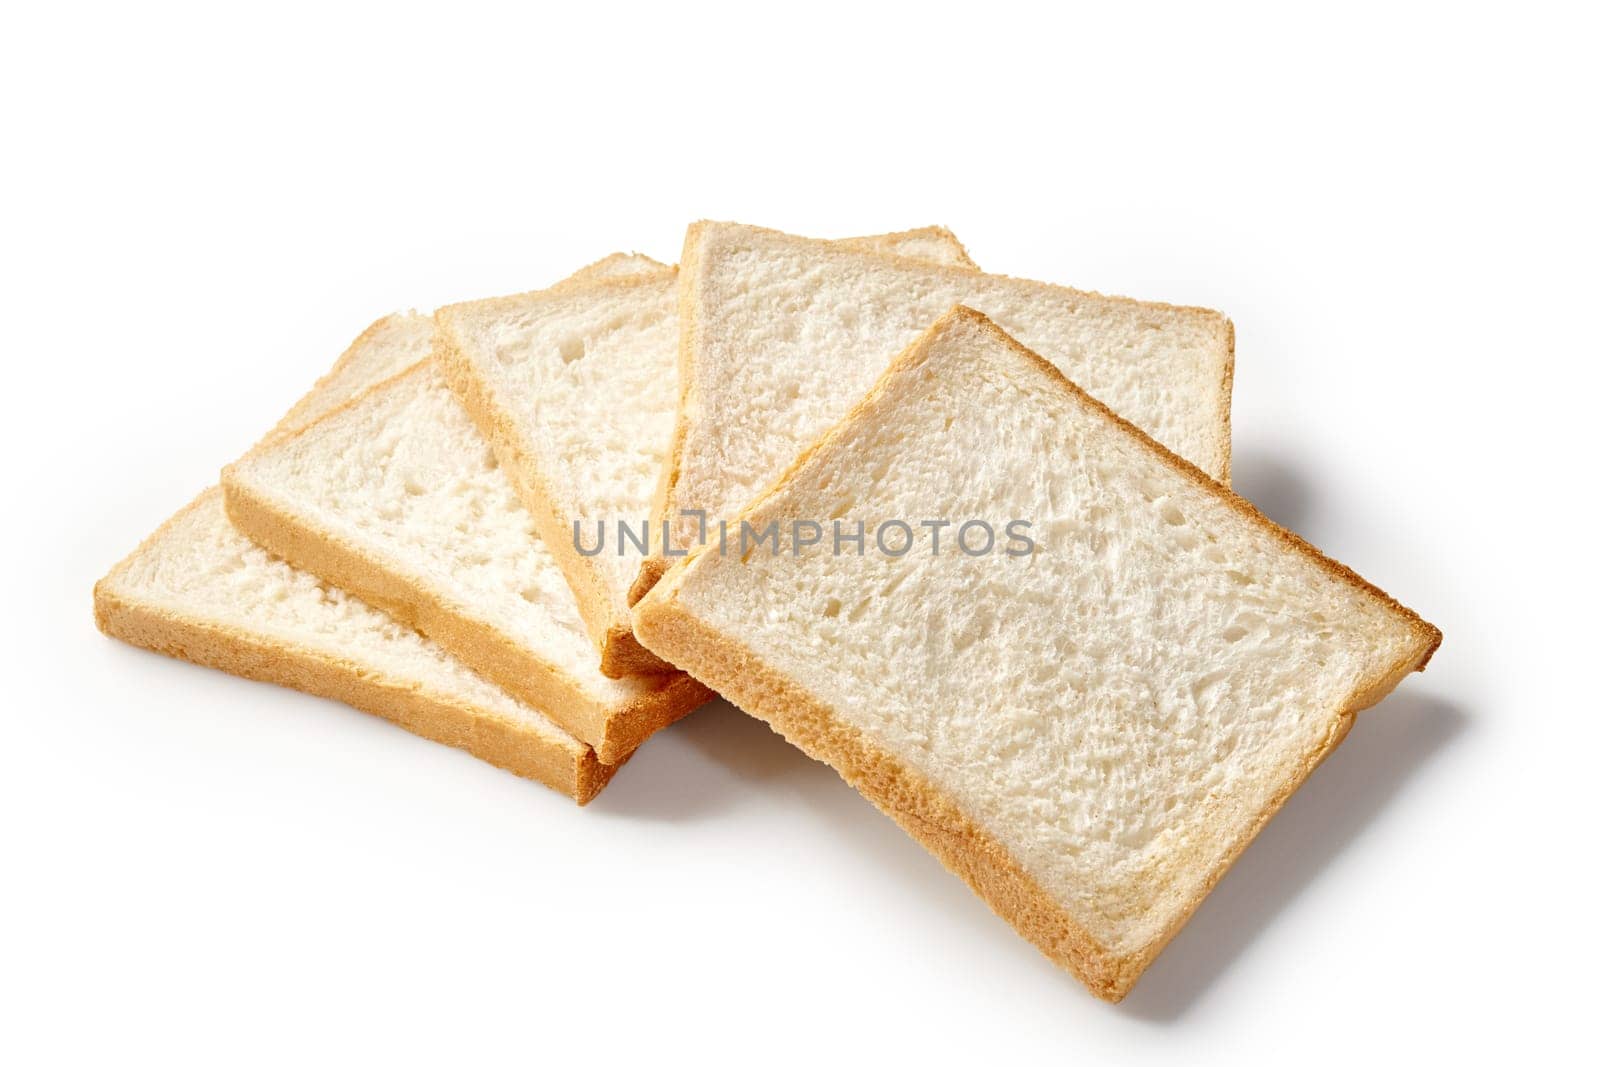 Stack of white sandwich bread slices with soft texture and golden edges, arranged against clean background, perfect for sandwiches or crispy toasts